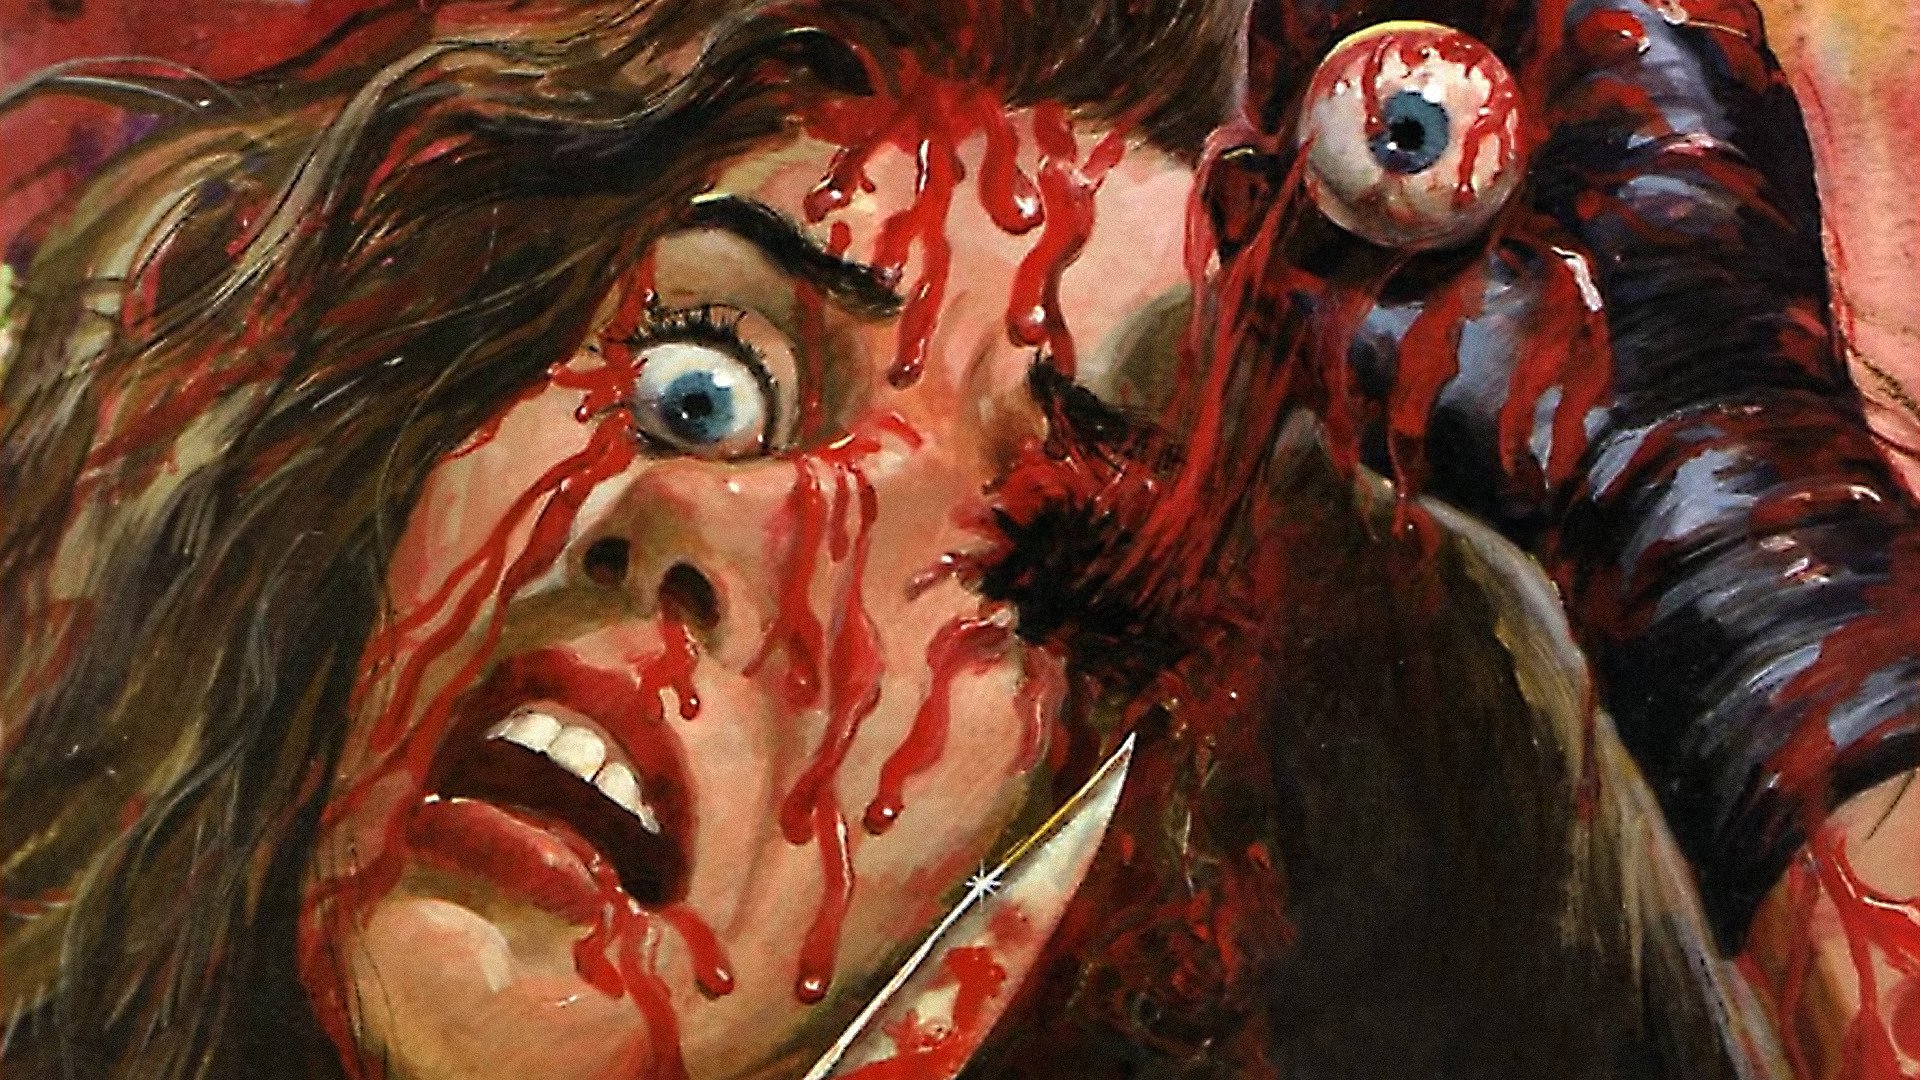 Gore Films The Depraved And Delicious Horrorfuel